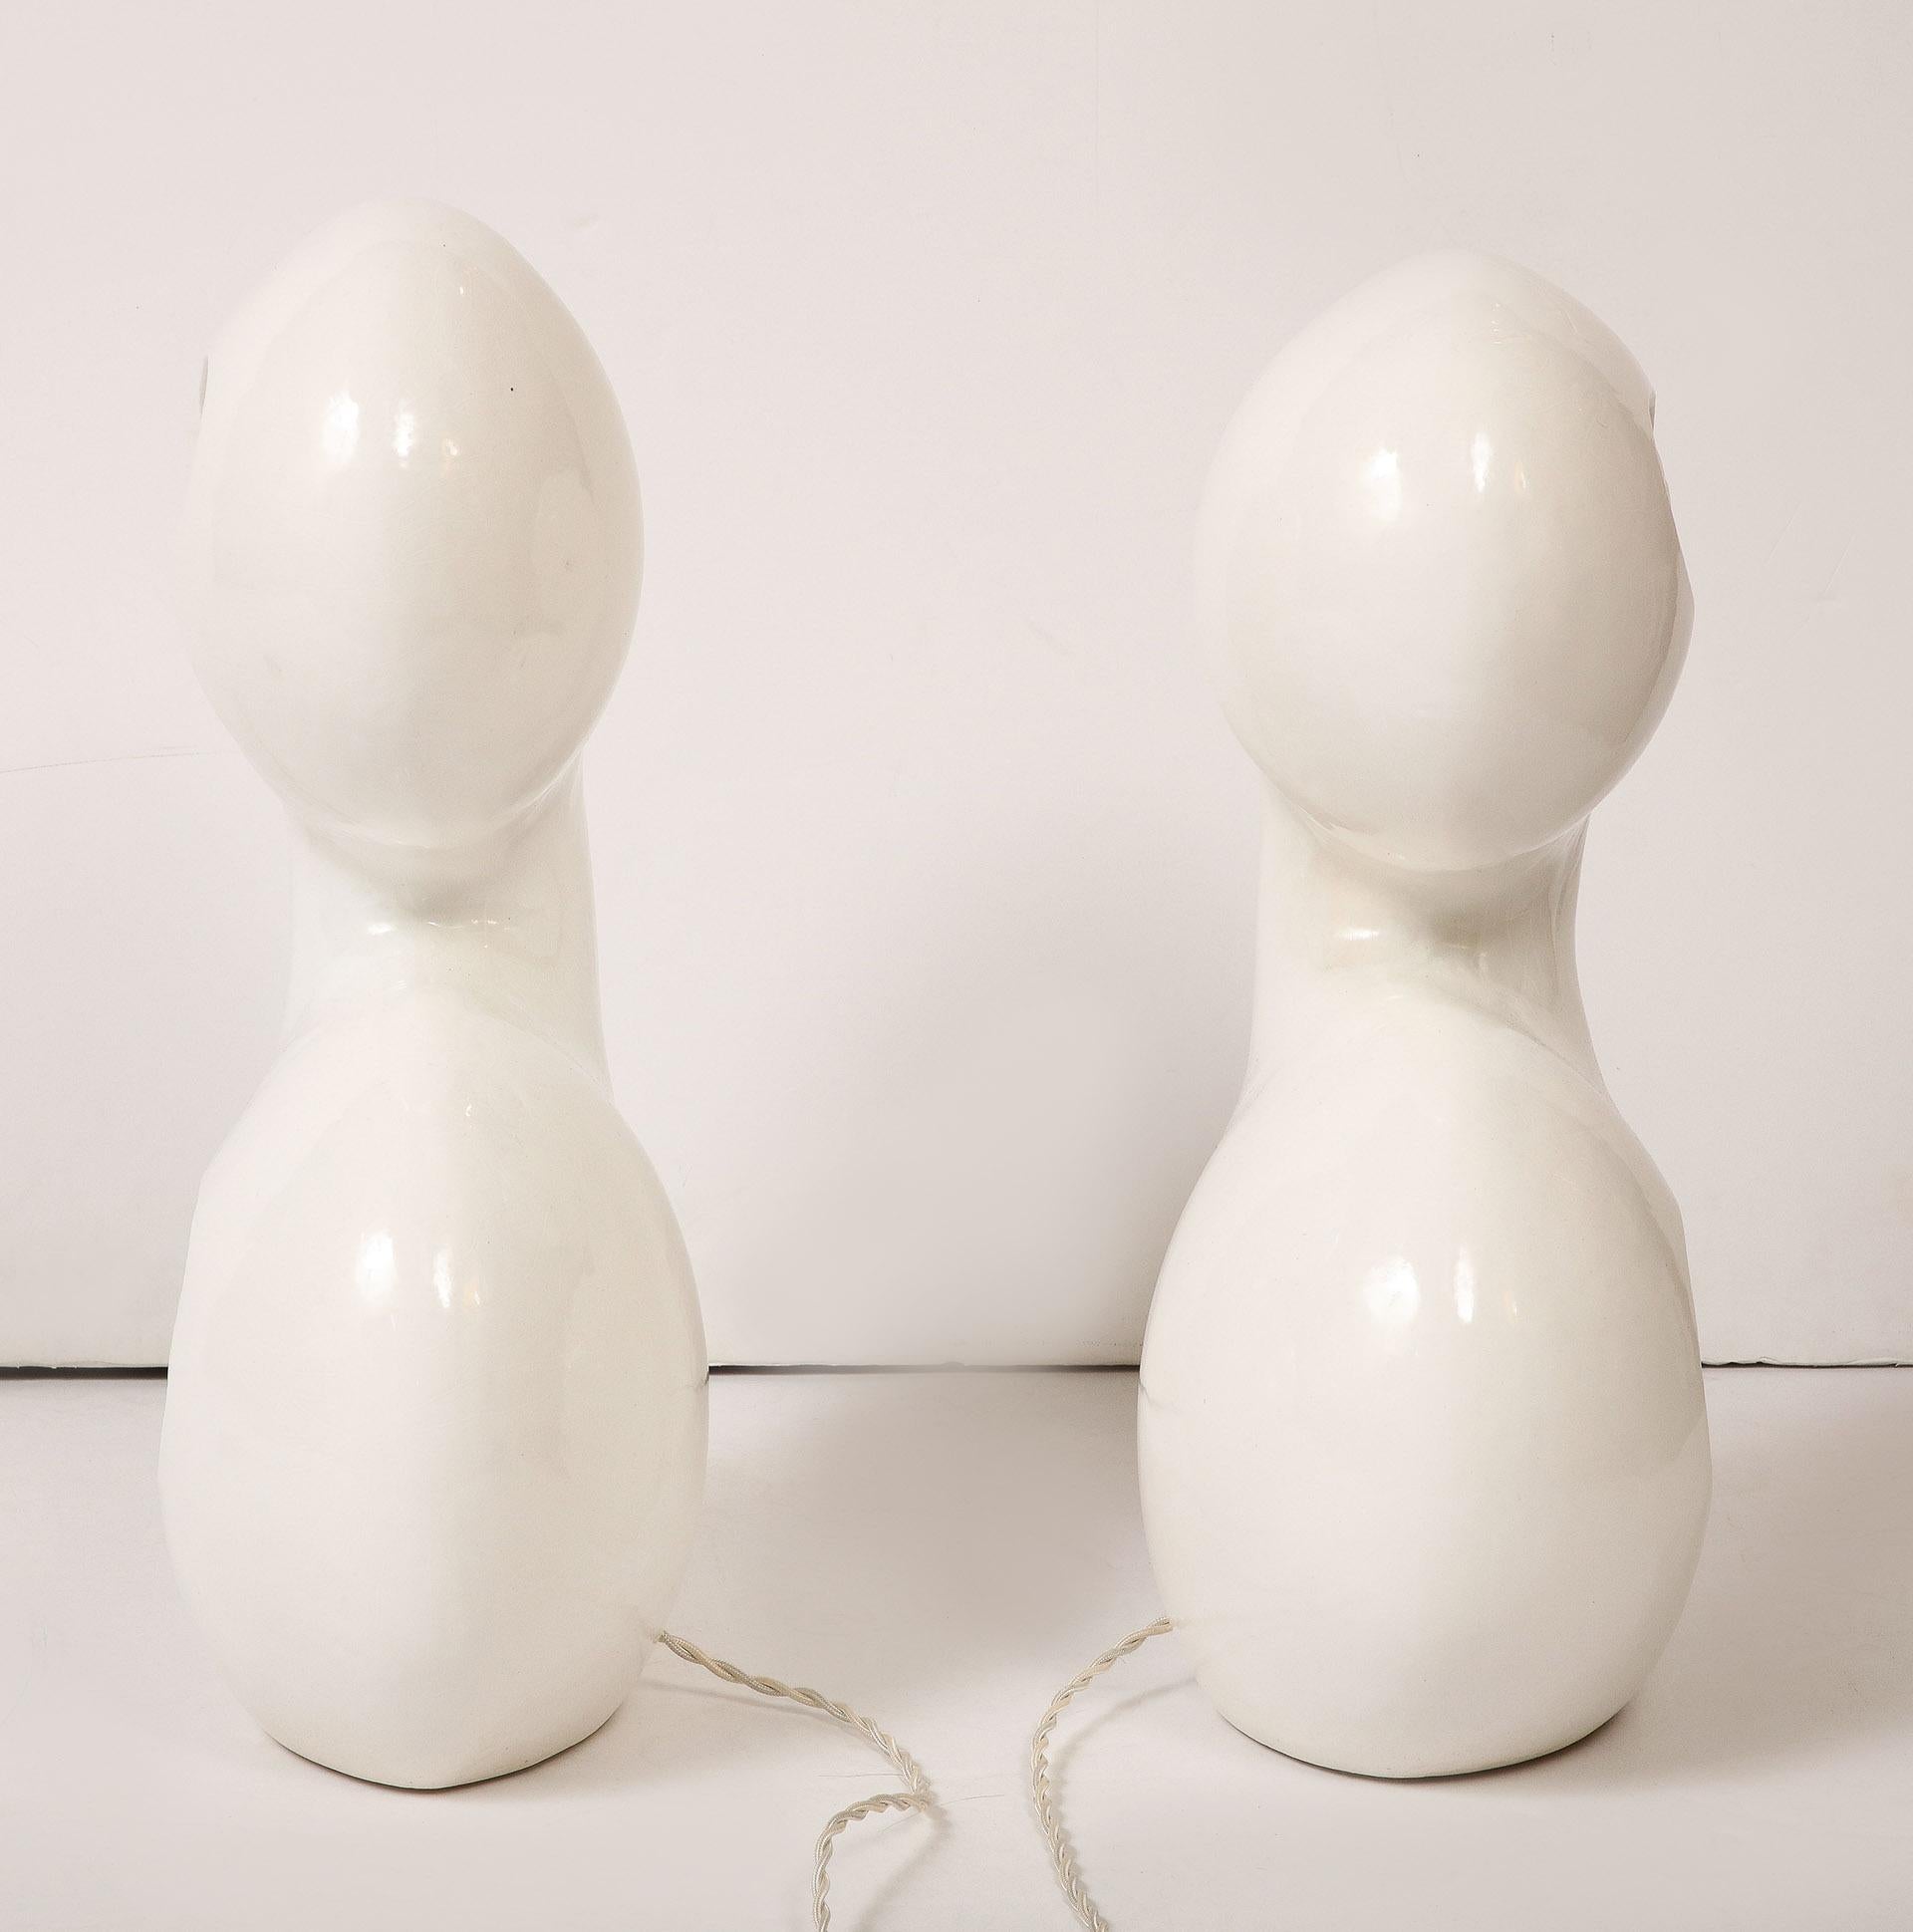 Contemporary A Pair of Internally Lighted Ceramic Sculptures Titled 